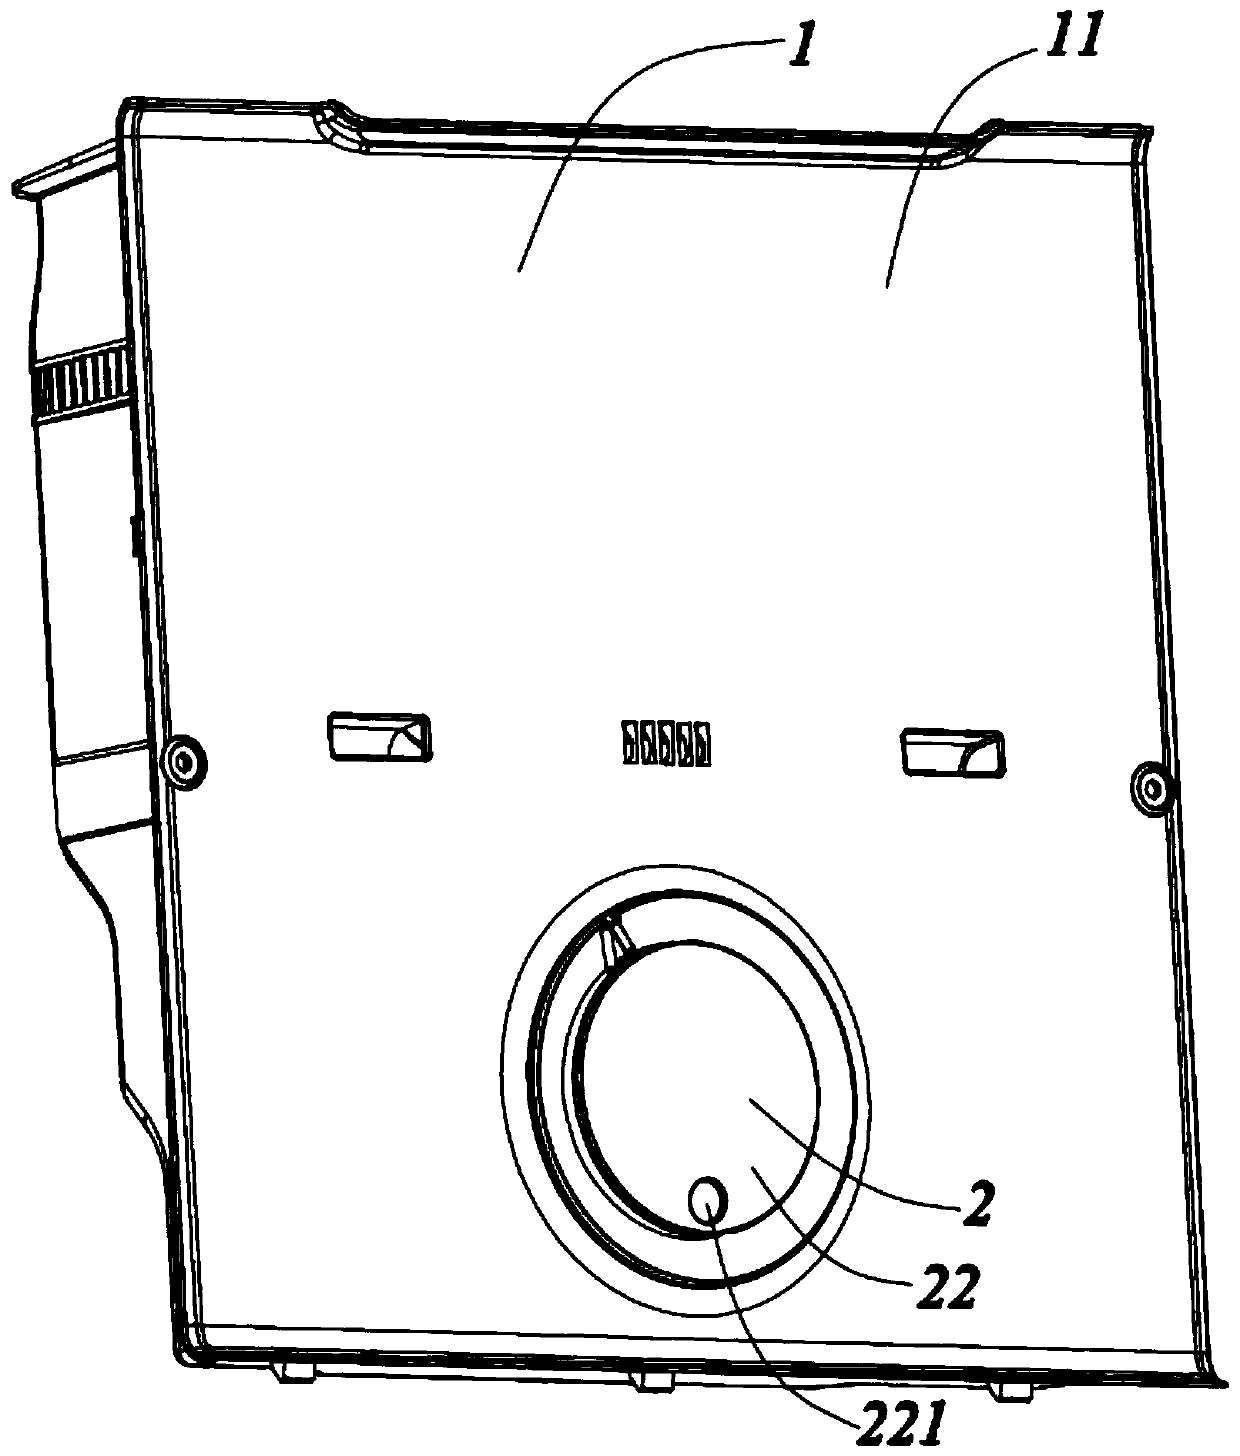 An air duct assembly and a refrigerator with the air duct assembly